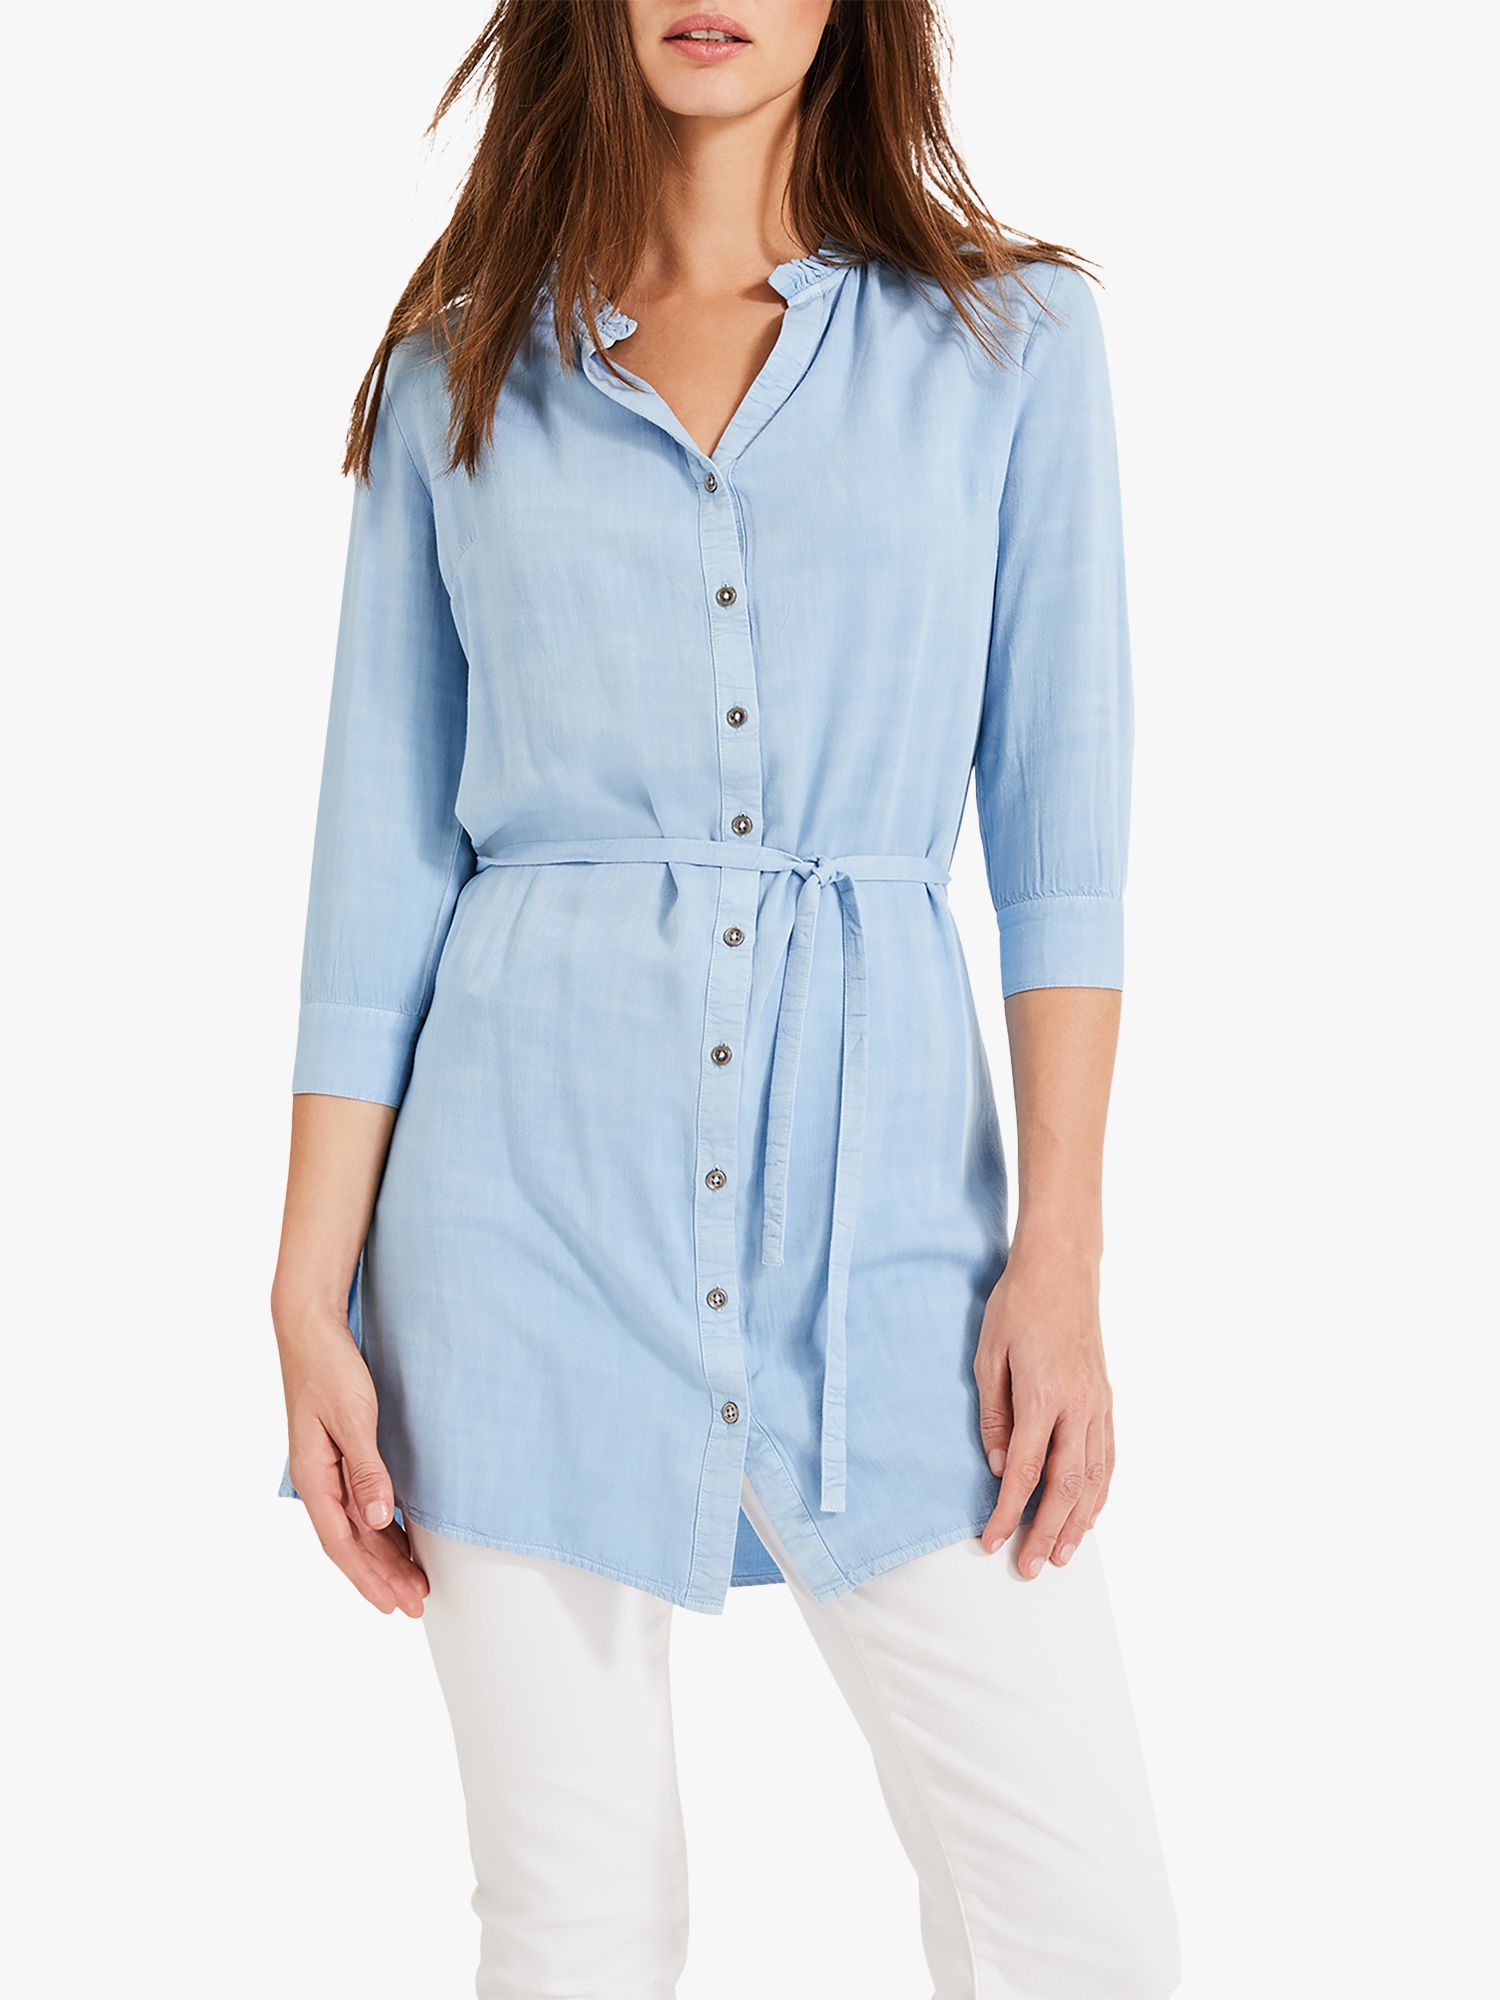 Phase Eight Rebecca Frill Tunic Top, Chambray